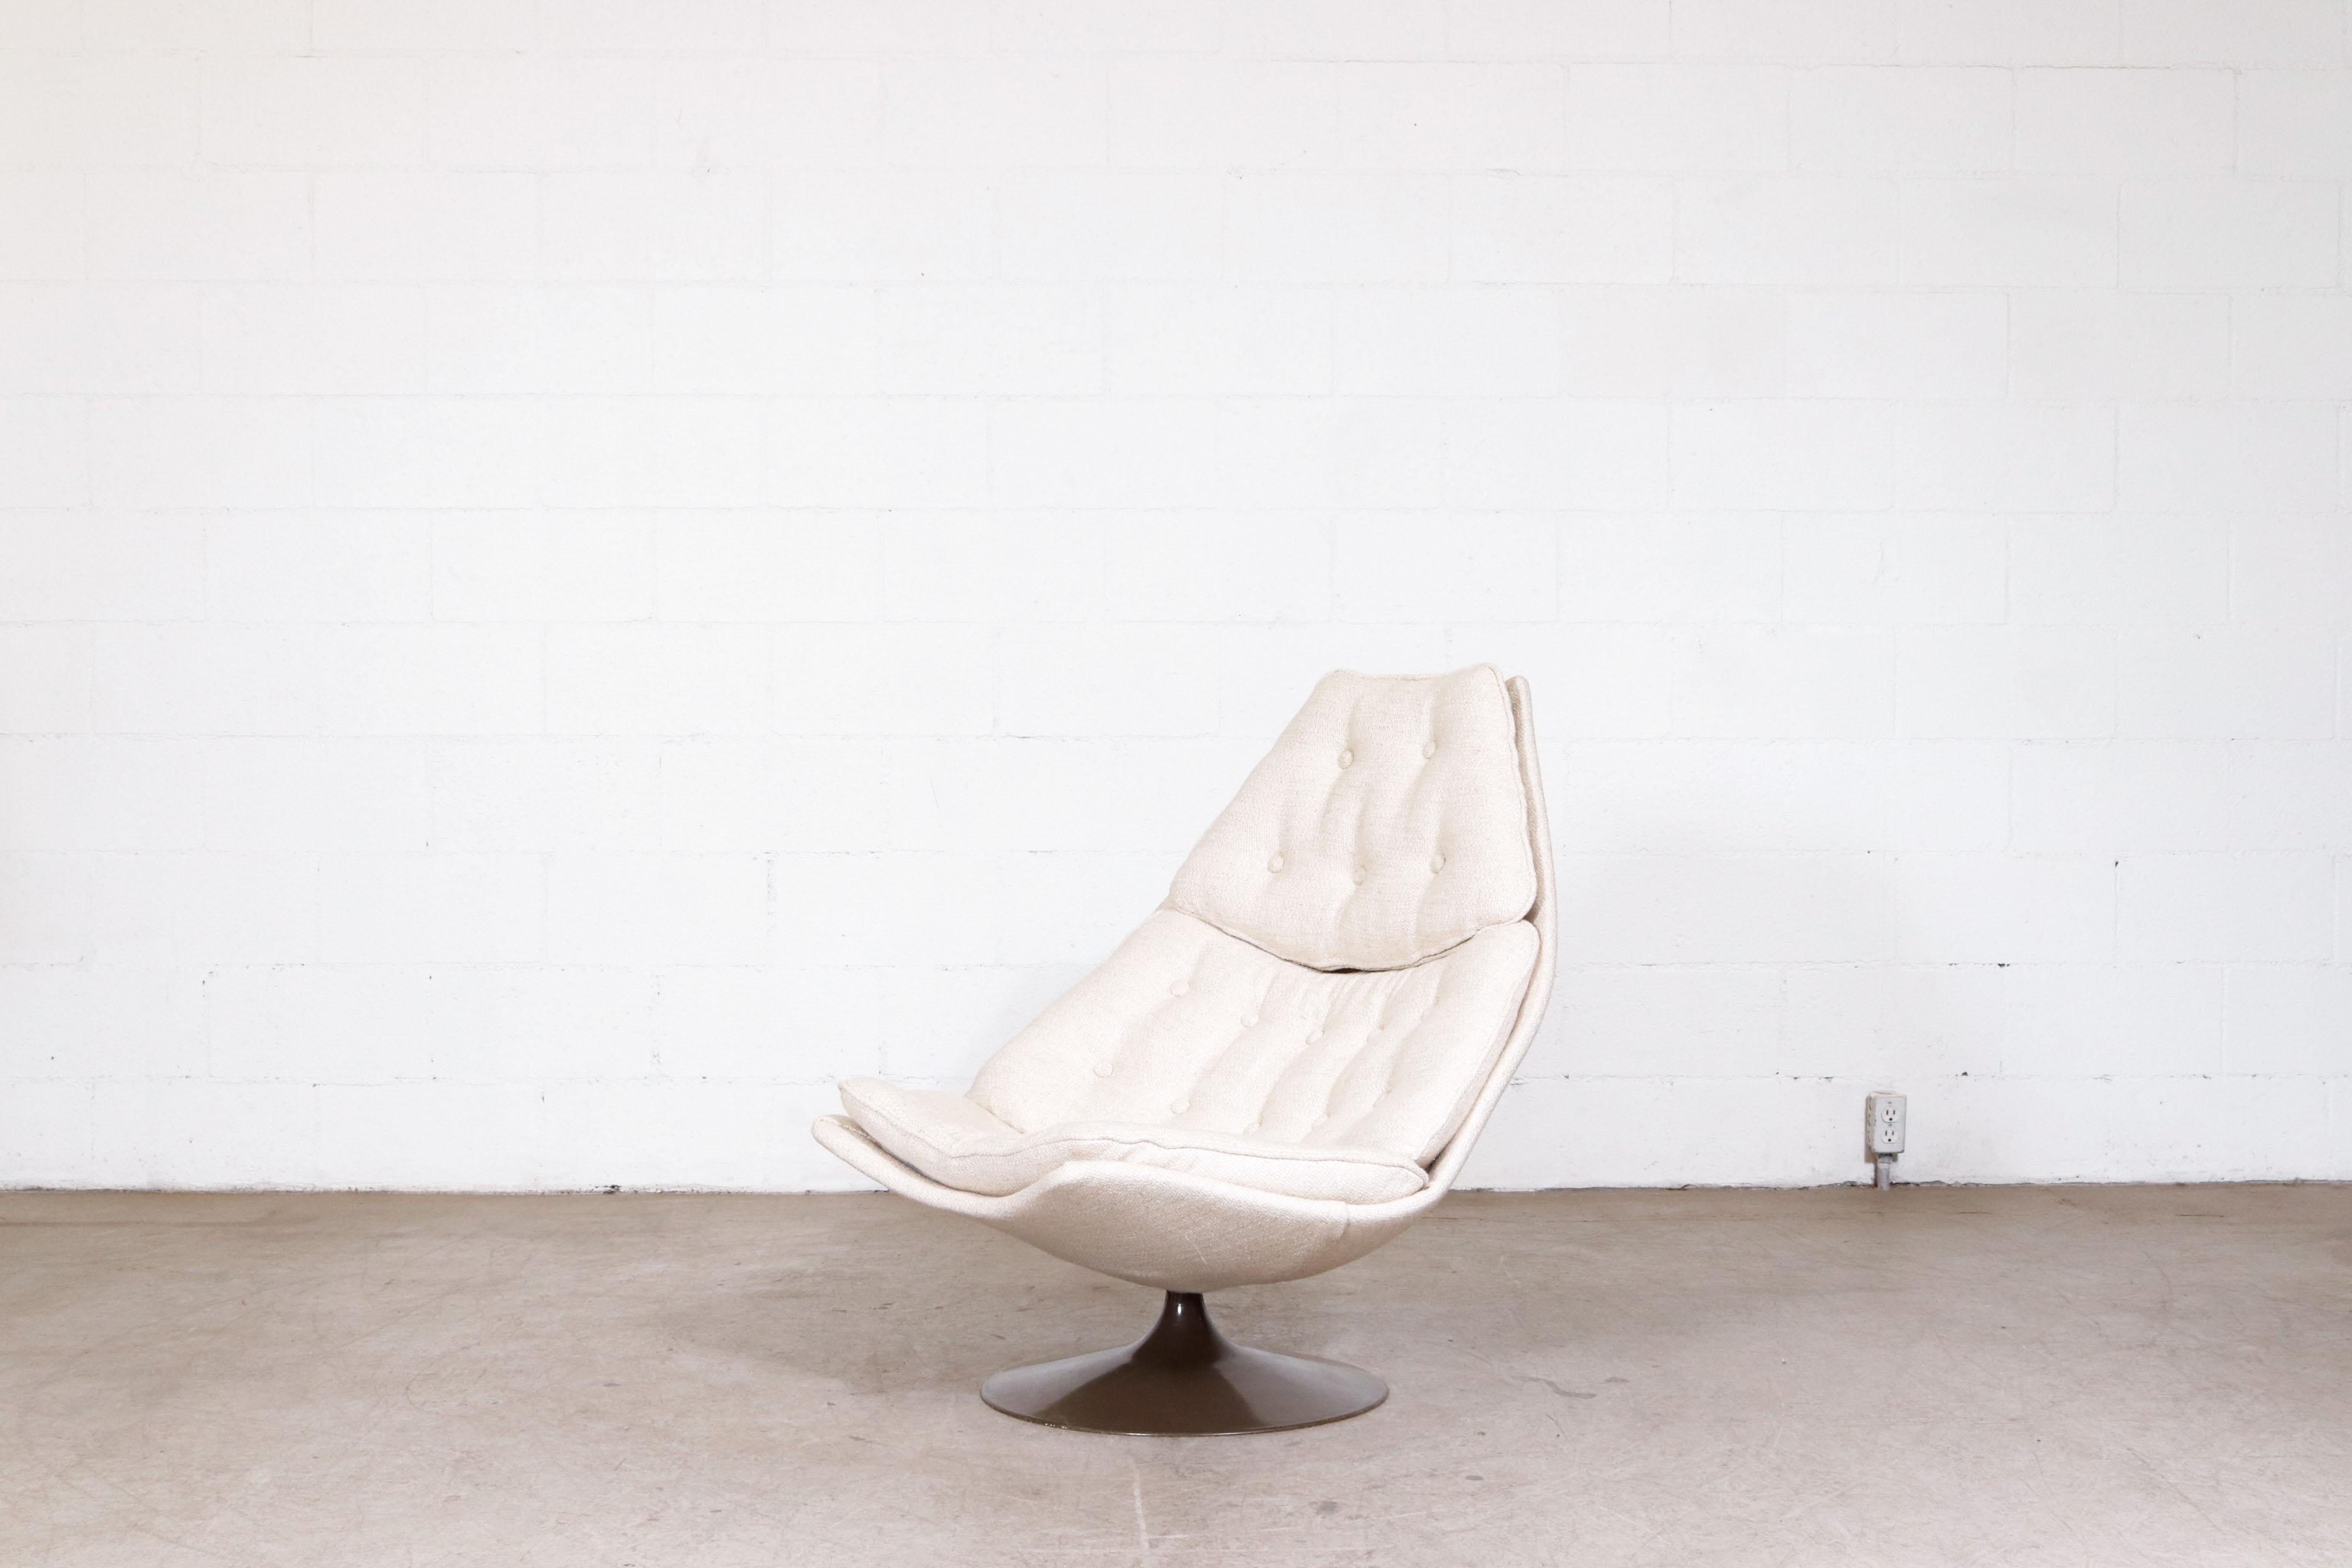 Beautiful 1967 Geoffrey Harcourt 'F588' Swivel lounge chair for Artifort. In impressive overall condition with new oatmeal fabric and original brown enameled metal trumpet base. Wear is consistent with it's age and use.